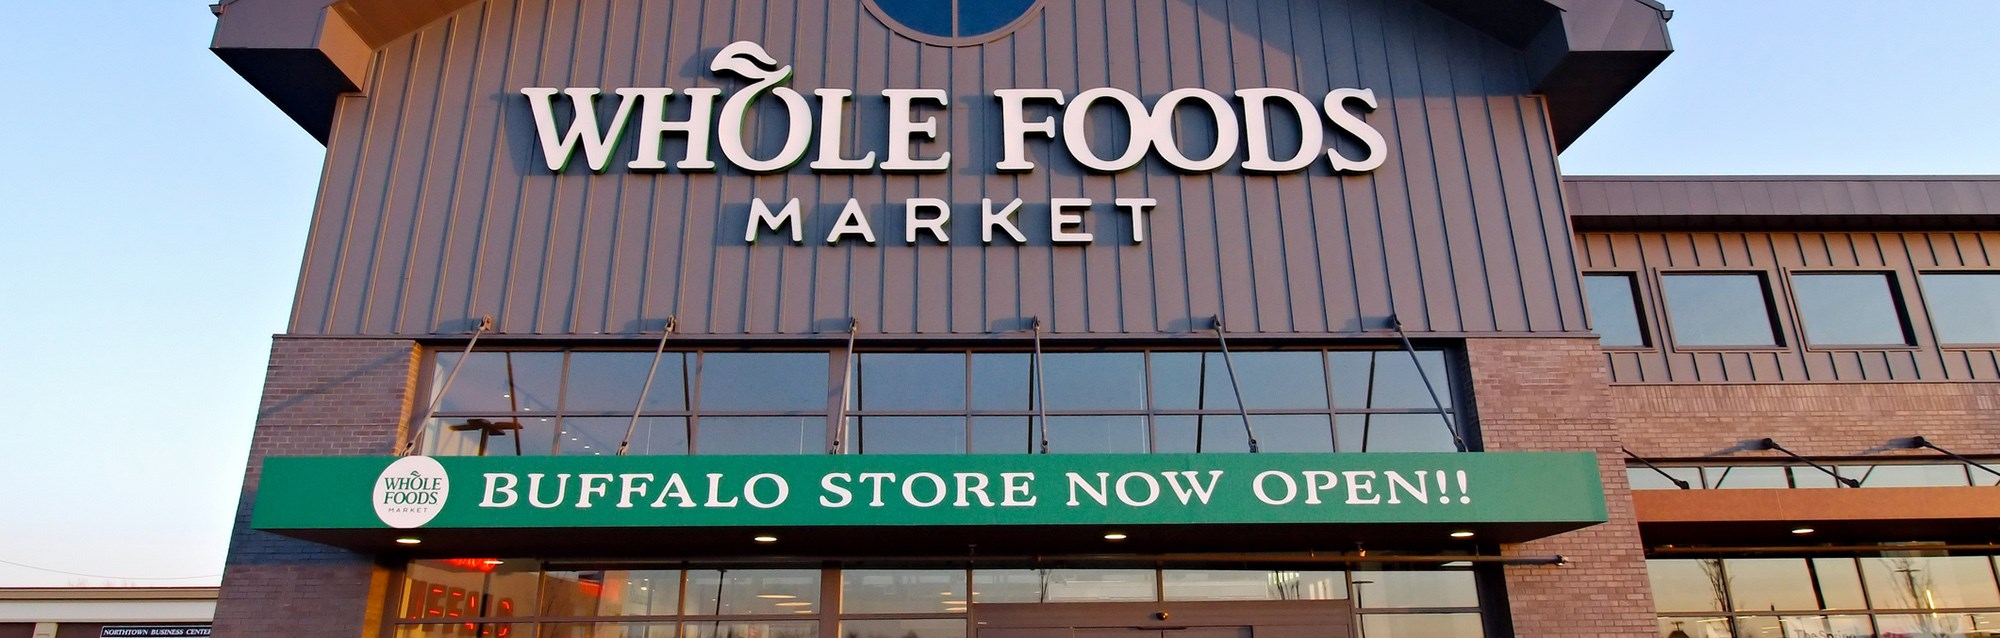 Exterior of Whole Foods Market grocery supermarket 